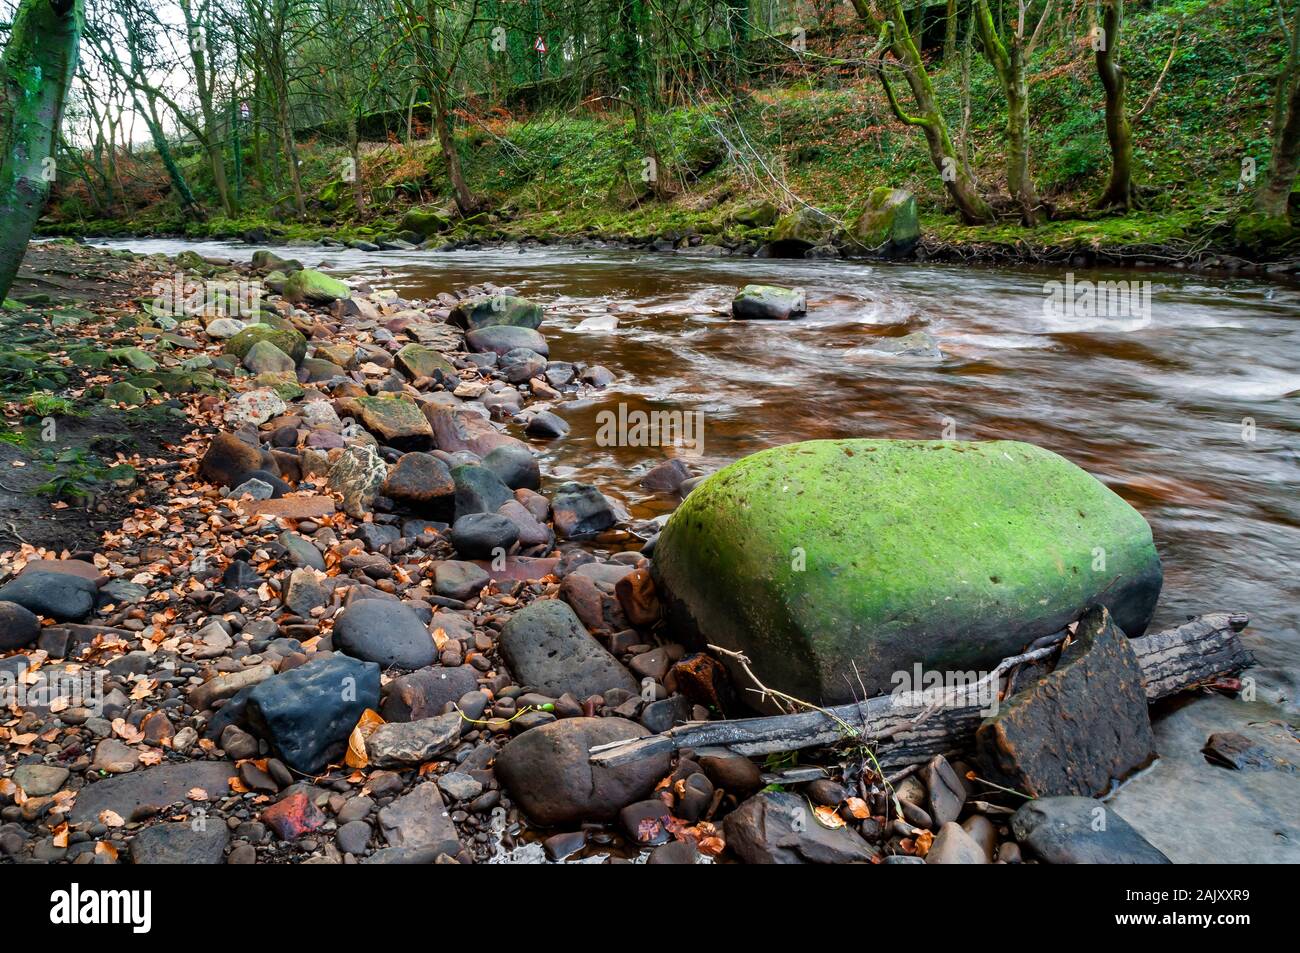 Large gritstone boulder sat in the edge of a fast River Don, flowing through ancient woodland, with cobbles and pebbles strewn around. Stock Photo